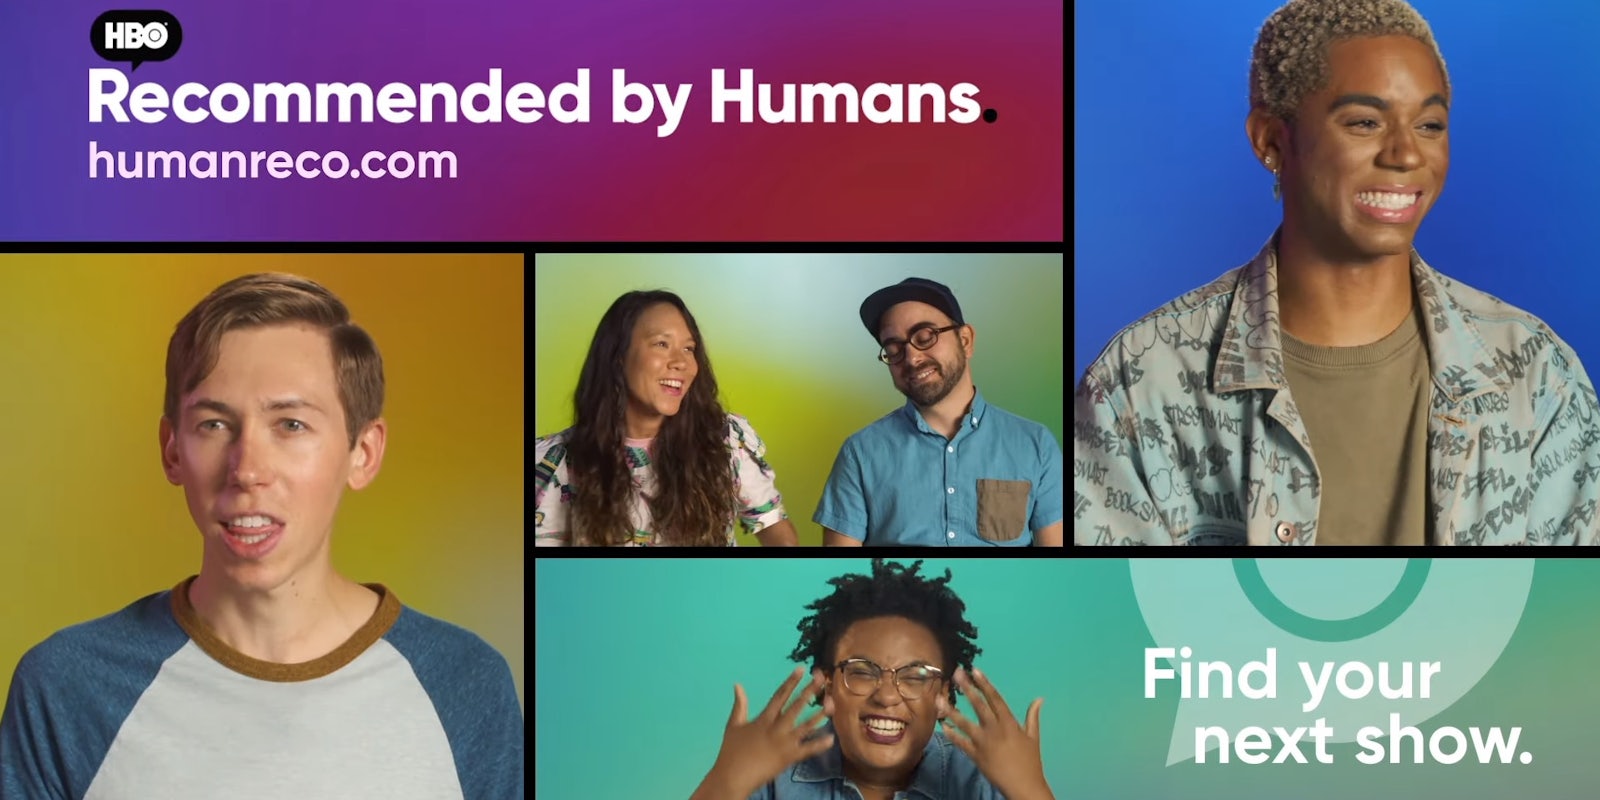 HBO recommended by humans streaming site